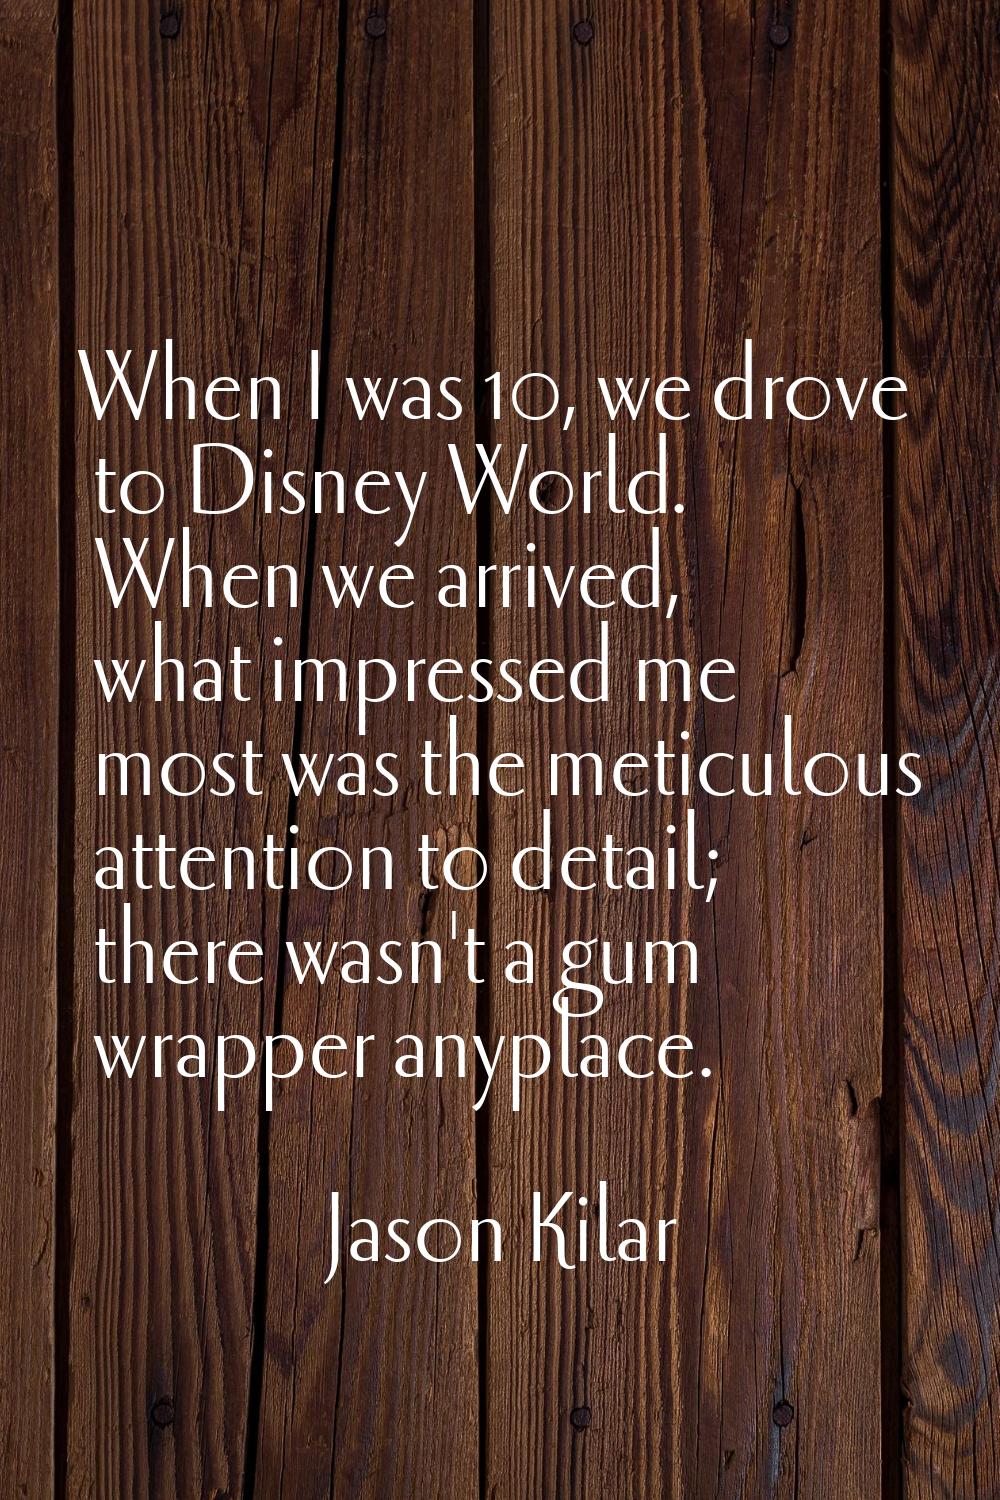 When I was 10, we drove to Disney World. When we arrived, what impressed me most was the meticulous